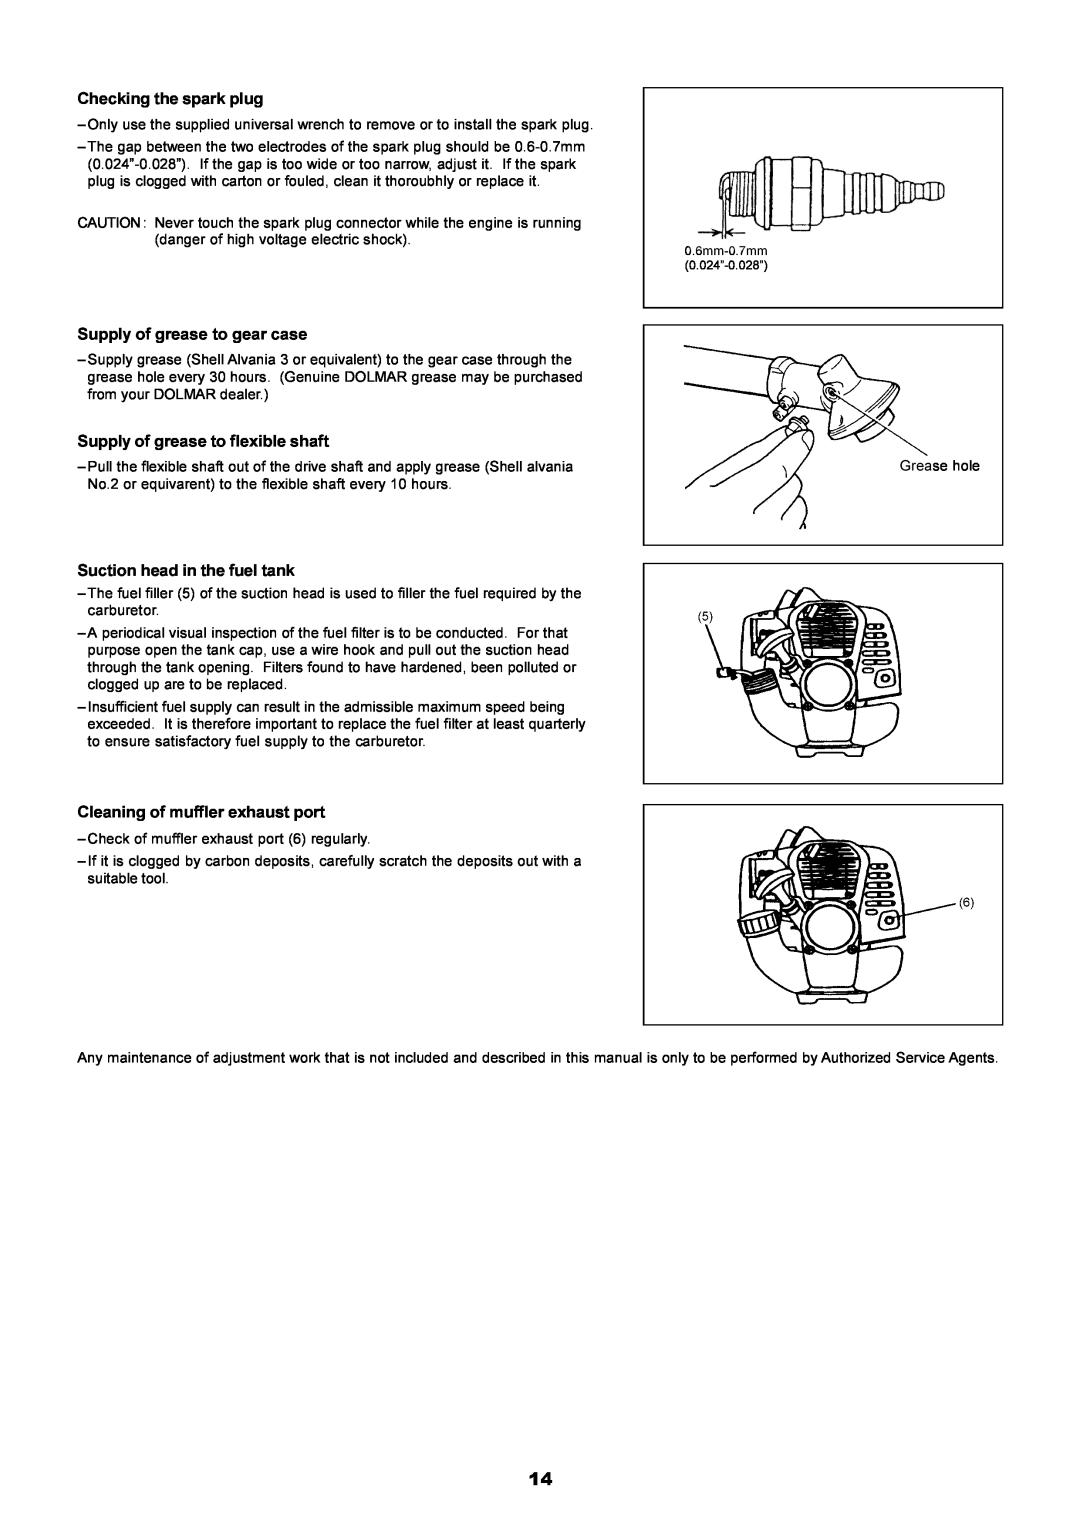 Dolmar PE-251 instruction manual Checking the spark plug, Supply of grease to gear case, Supply of grease to flexible shaft 